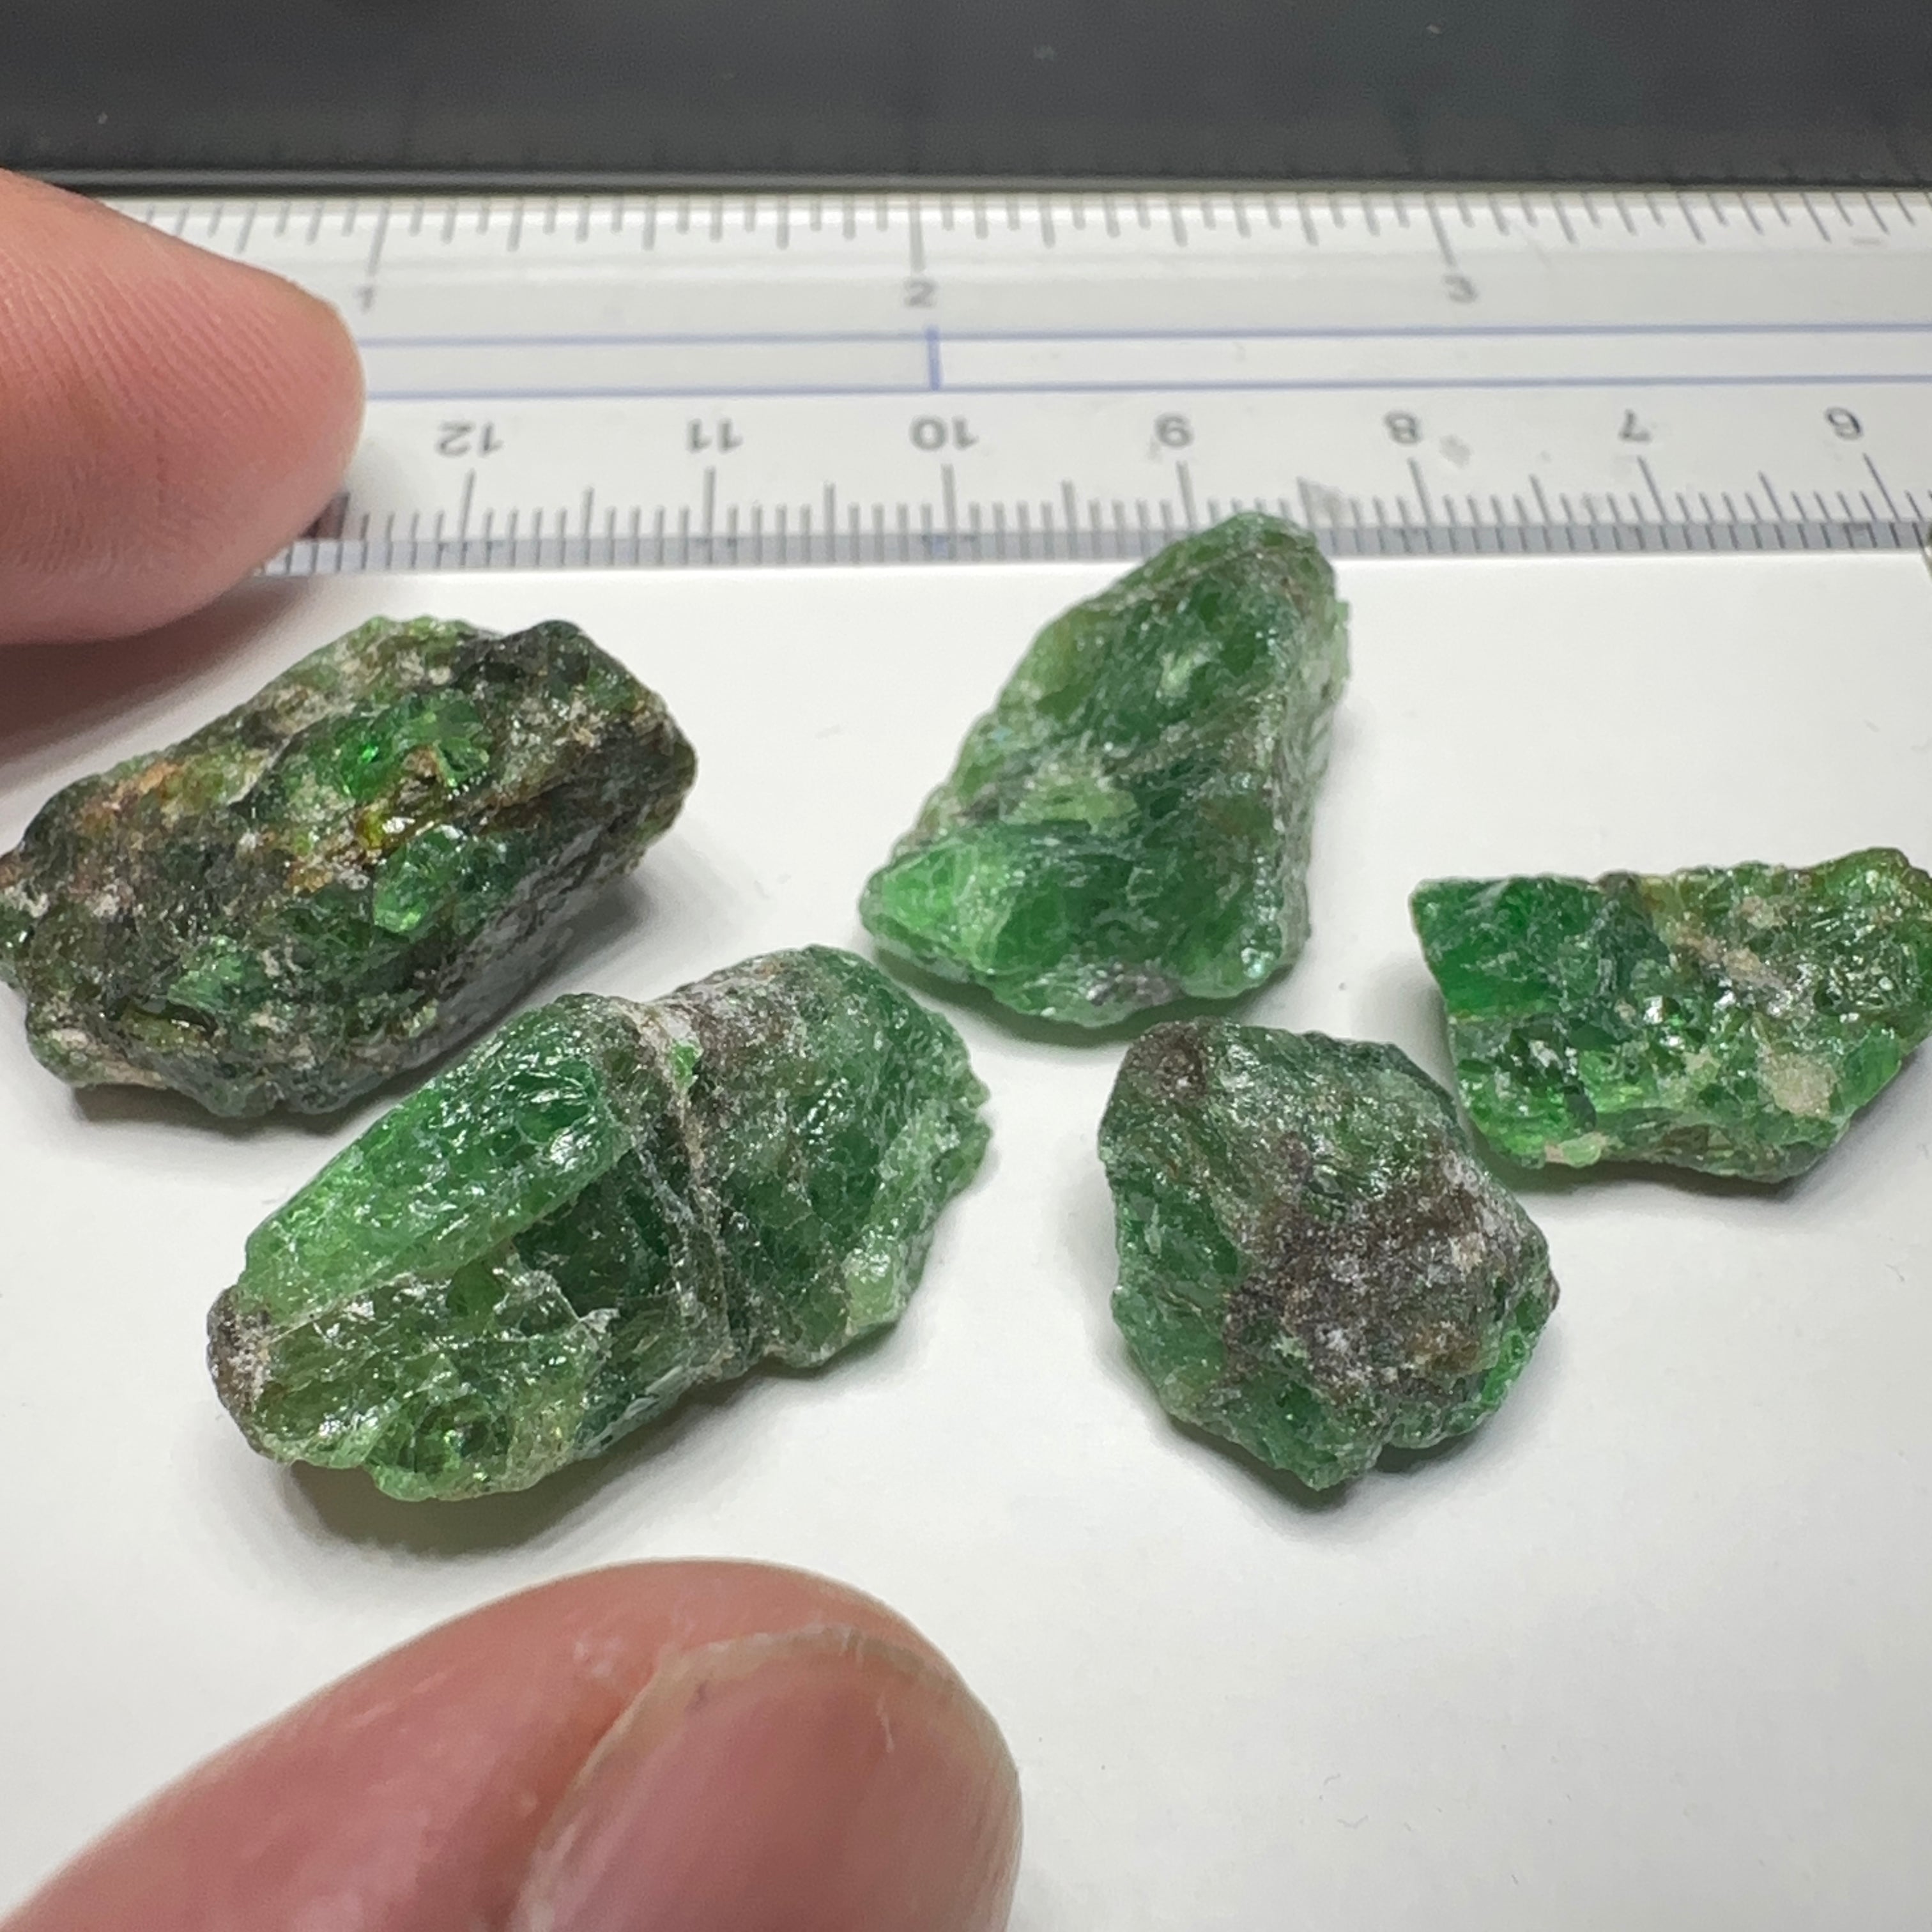 101.98ct Tsavorite Garnet Lot, Tanzania. Untreated Unheated. 11.26ct- 27.87ct. Good as specimens to add to a collection